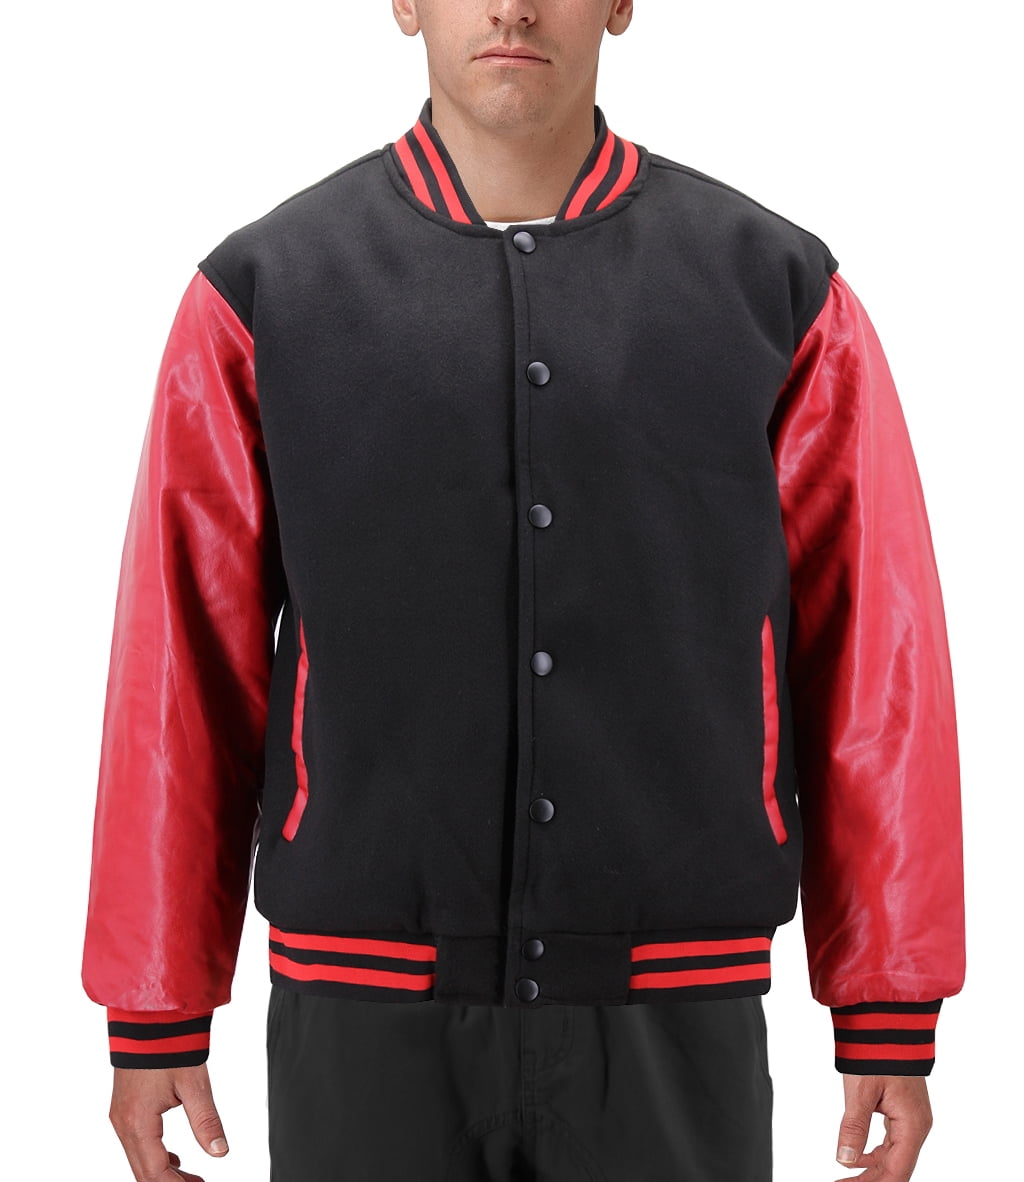 Goodwill kold ligning Men's Classic Two Tone Snap Button College Sports Letterman Varsity Jacket  (Black/Red, M) - Walmart.com